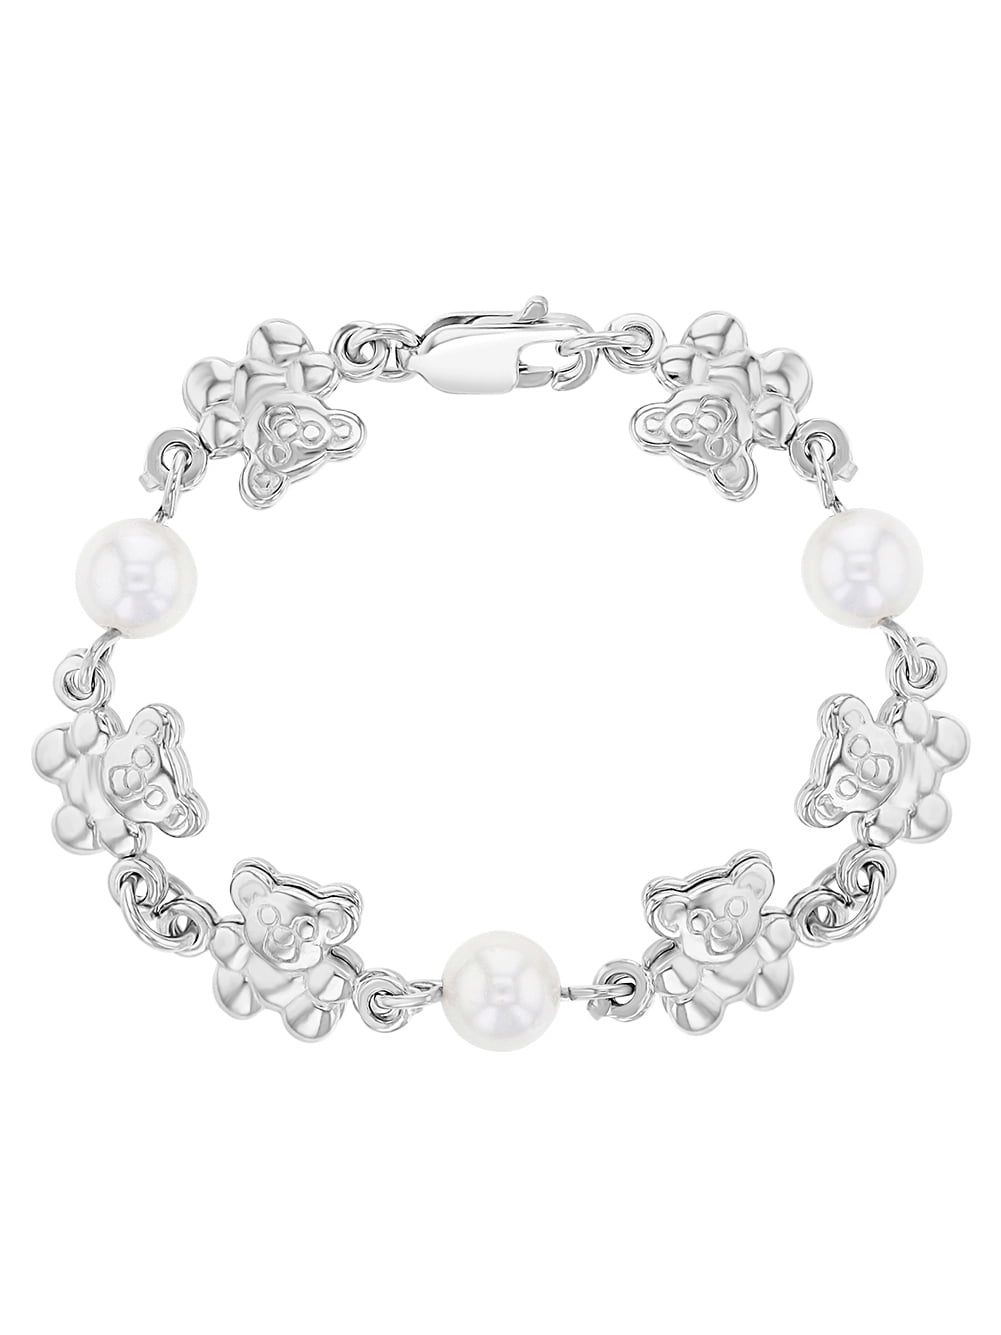 925 Sterling Silver Guardian Angel Charm Simulated Pearl Bracelet for Babies 5 